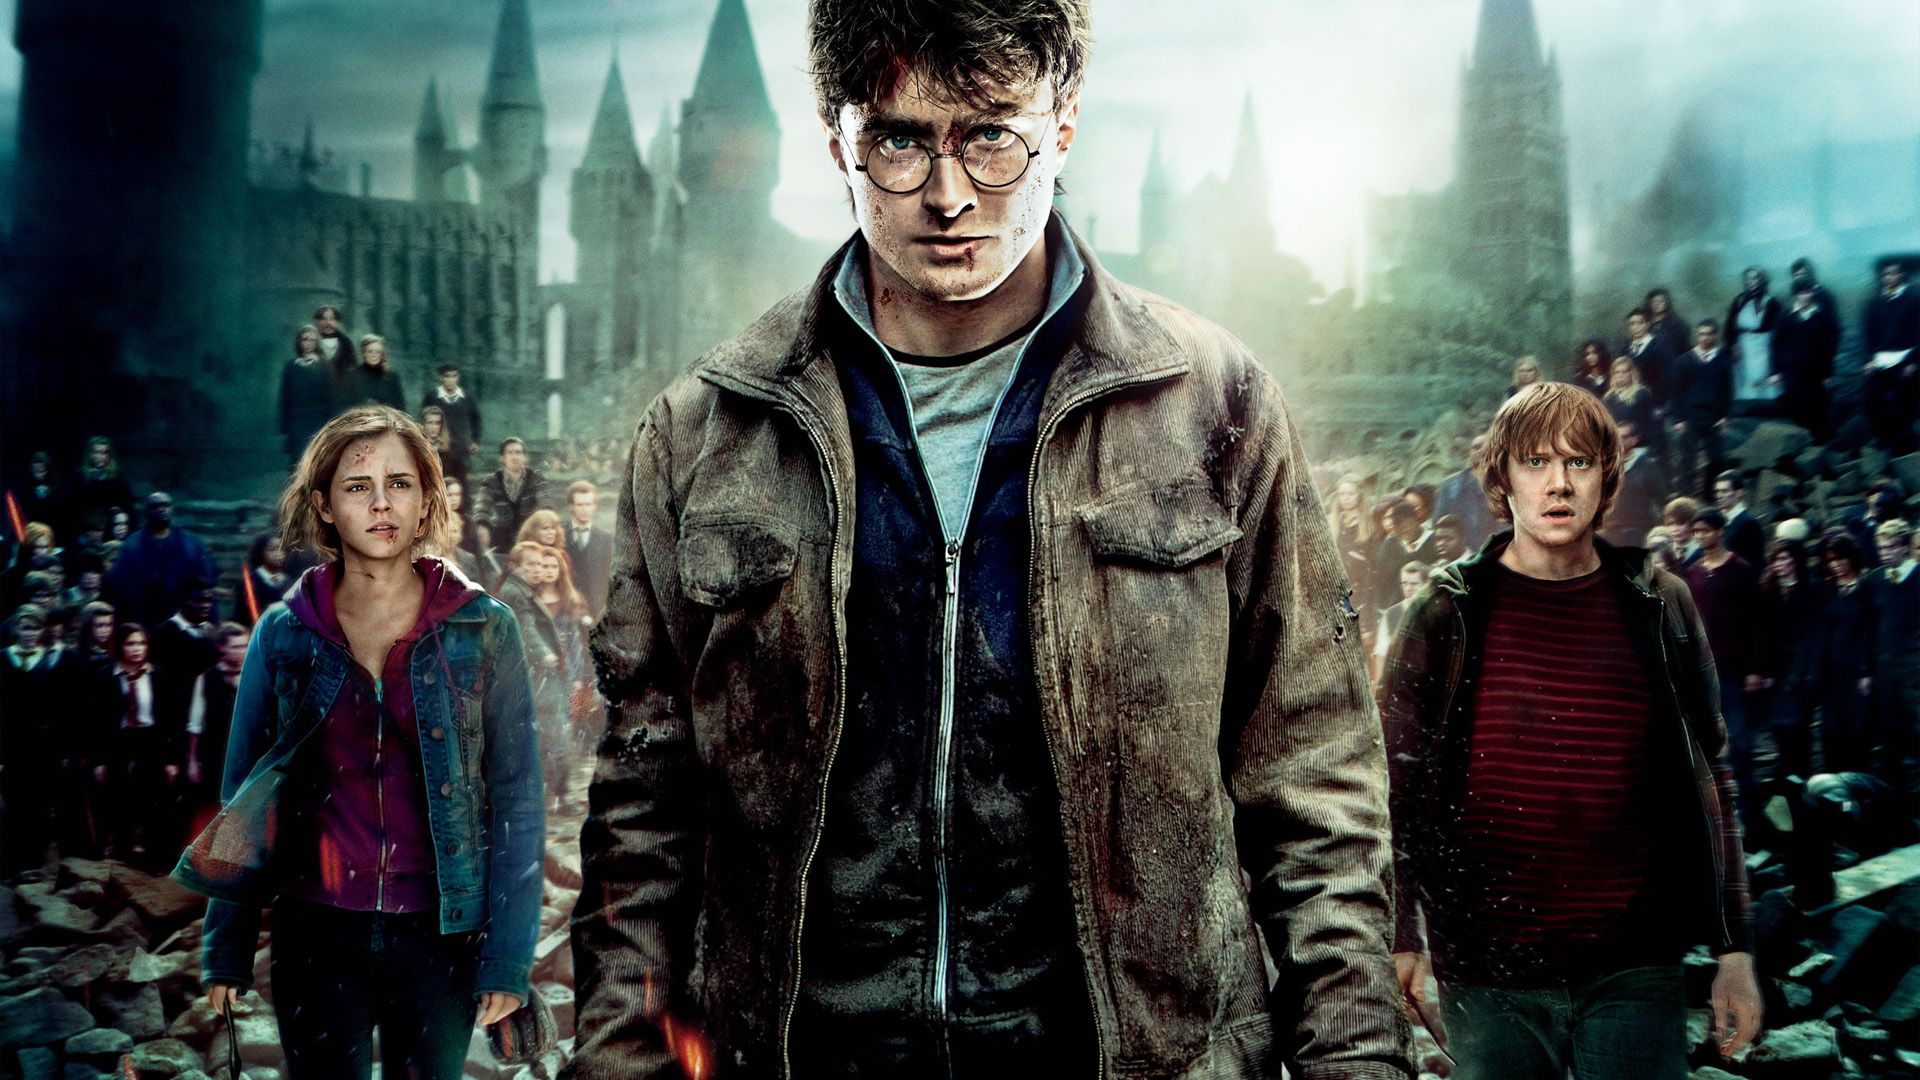 HARRY POTTER DEATHLY HALLOWS r wallpaper | 1920x1080 | 102001 ...